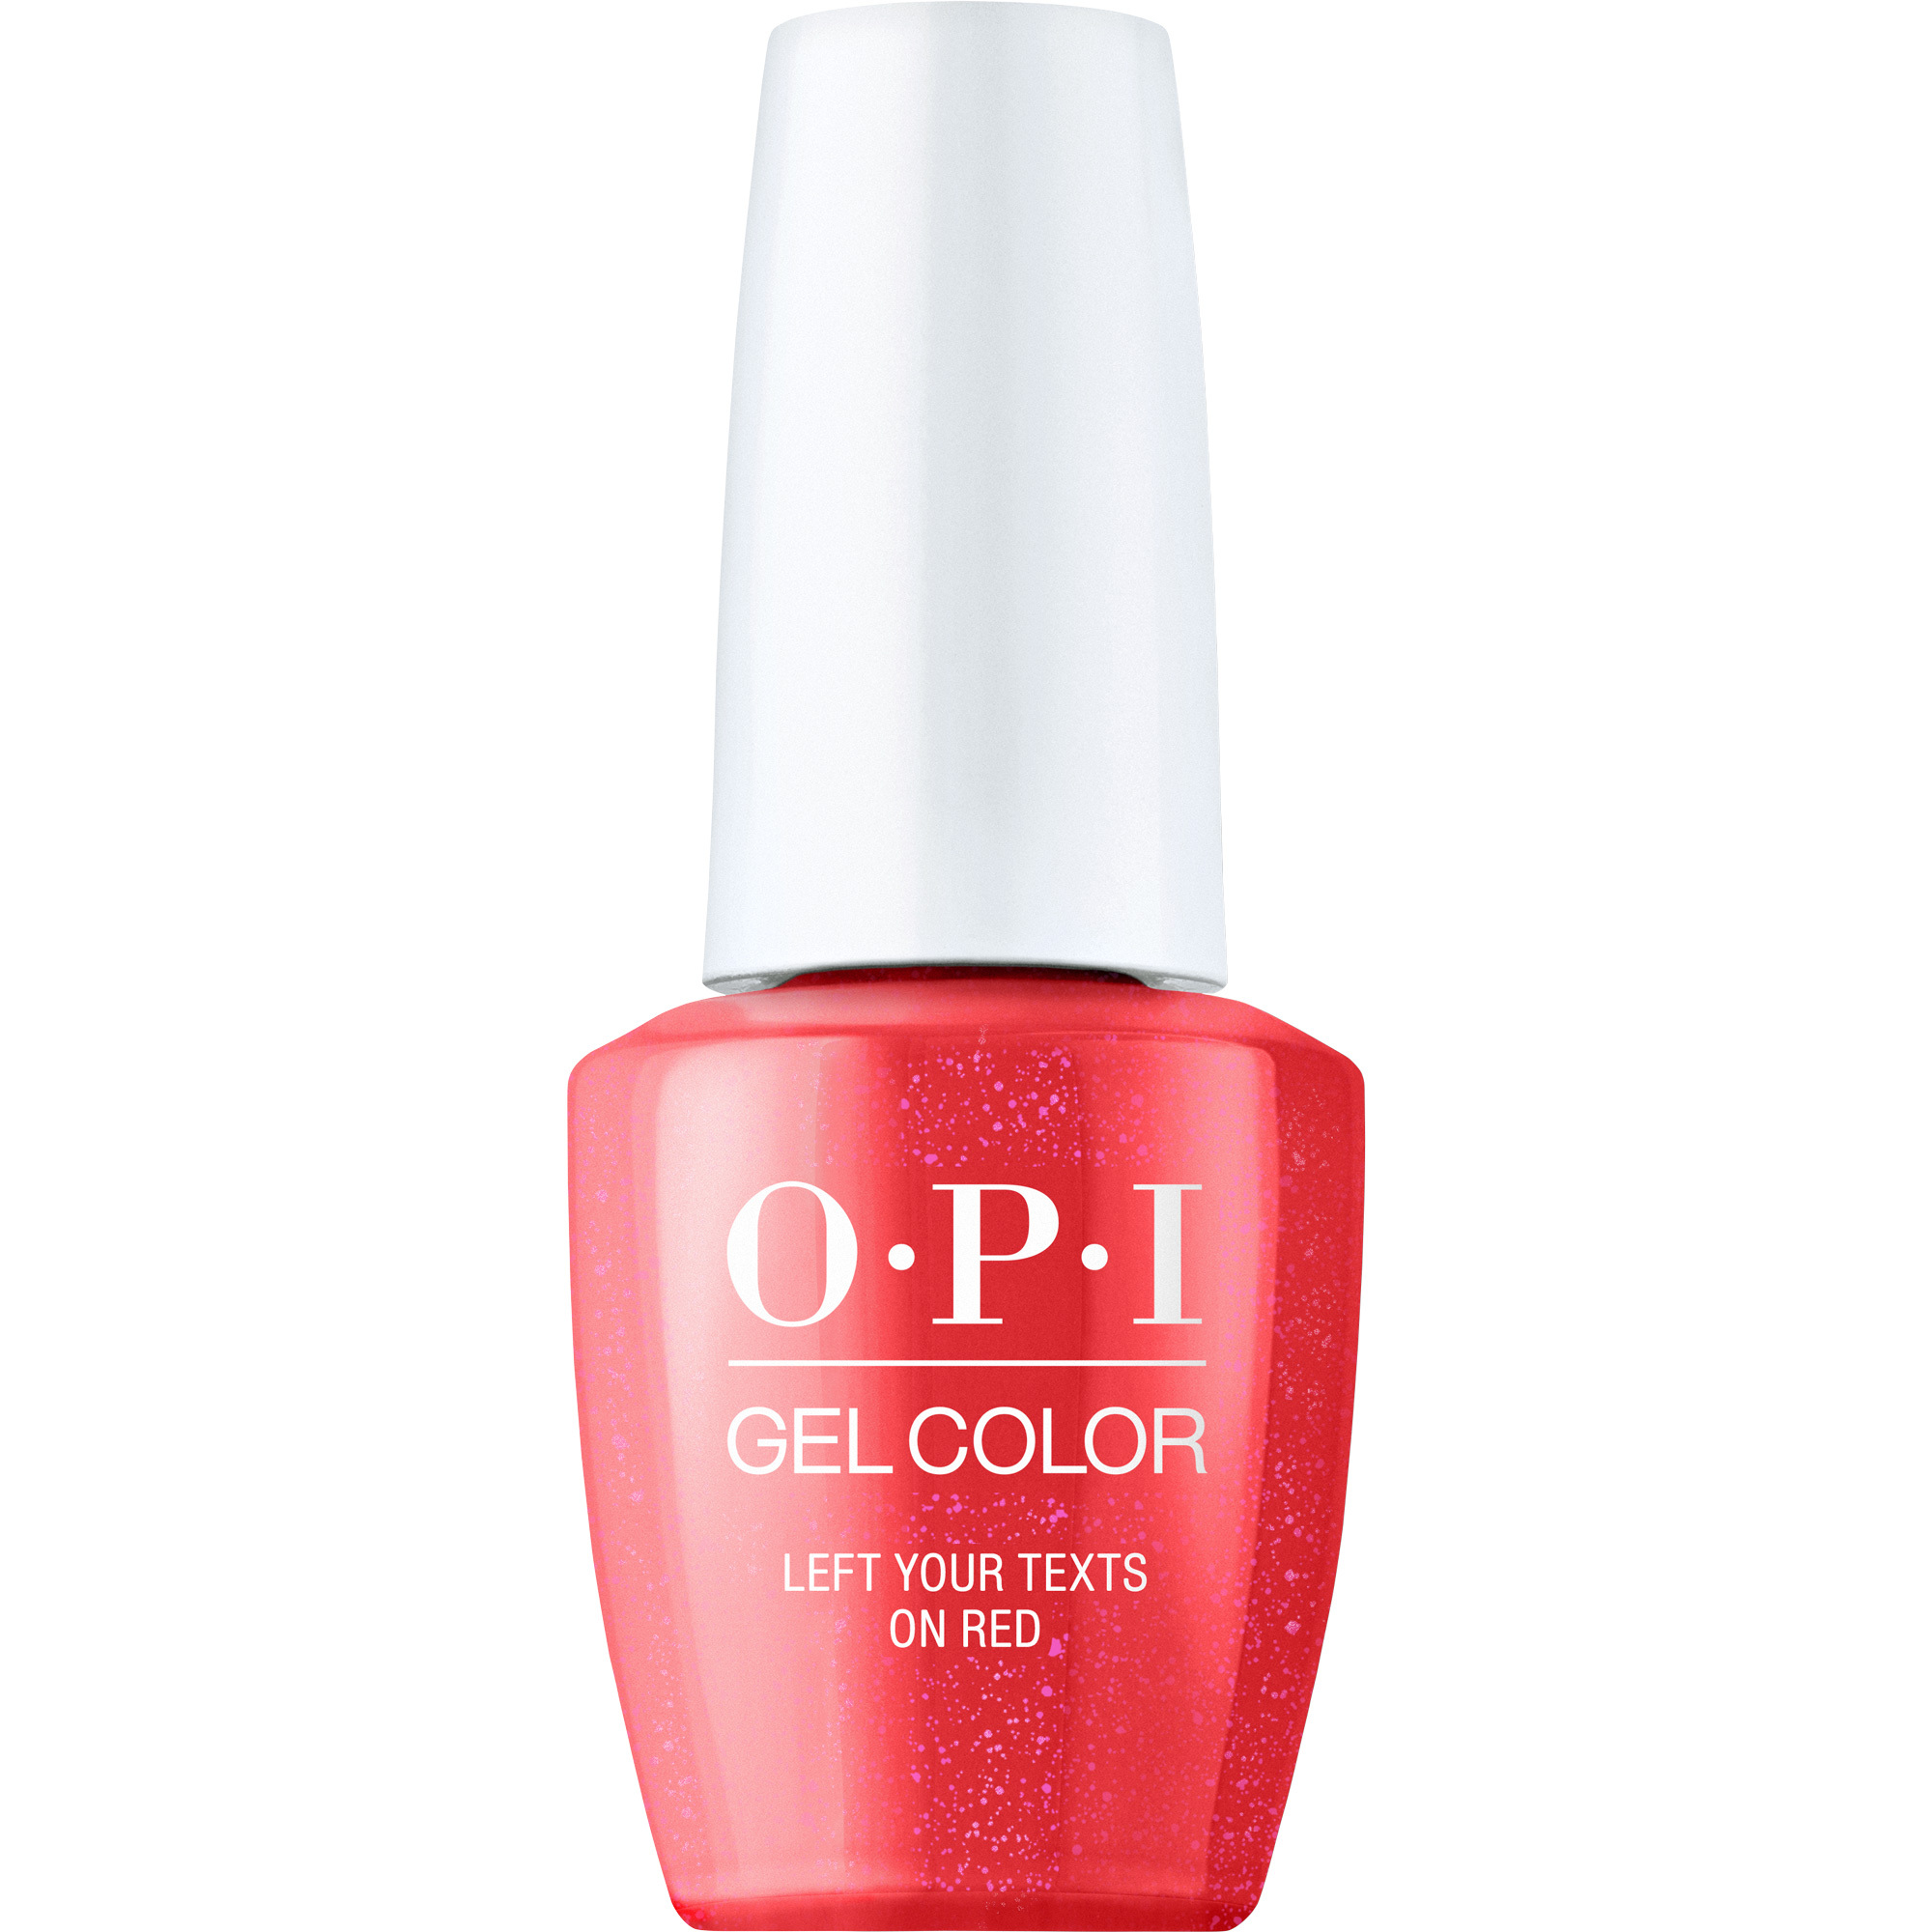 OPI Gel Color 360 - Left Your Texts on Red